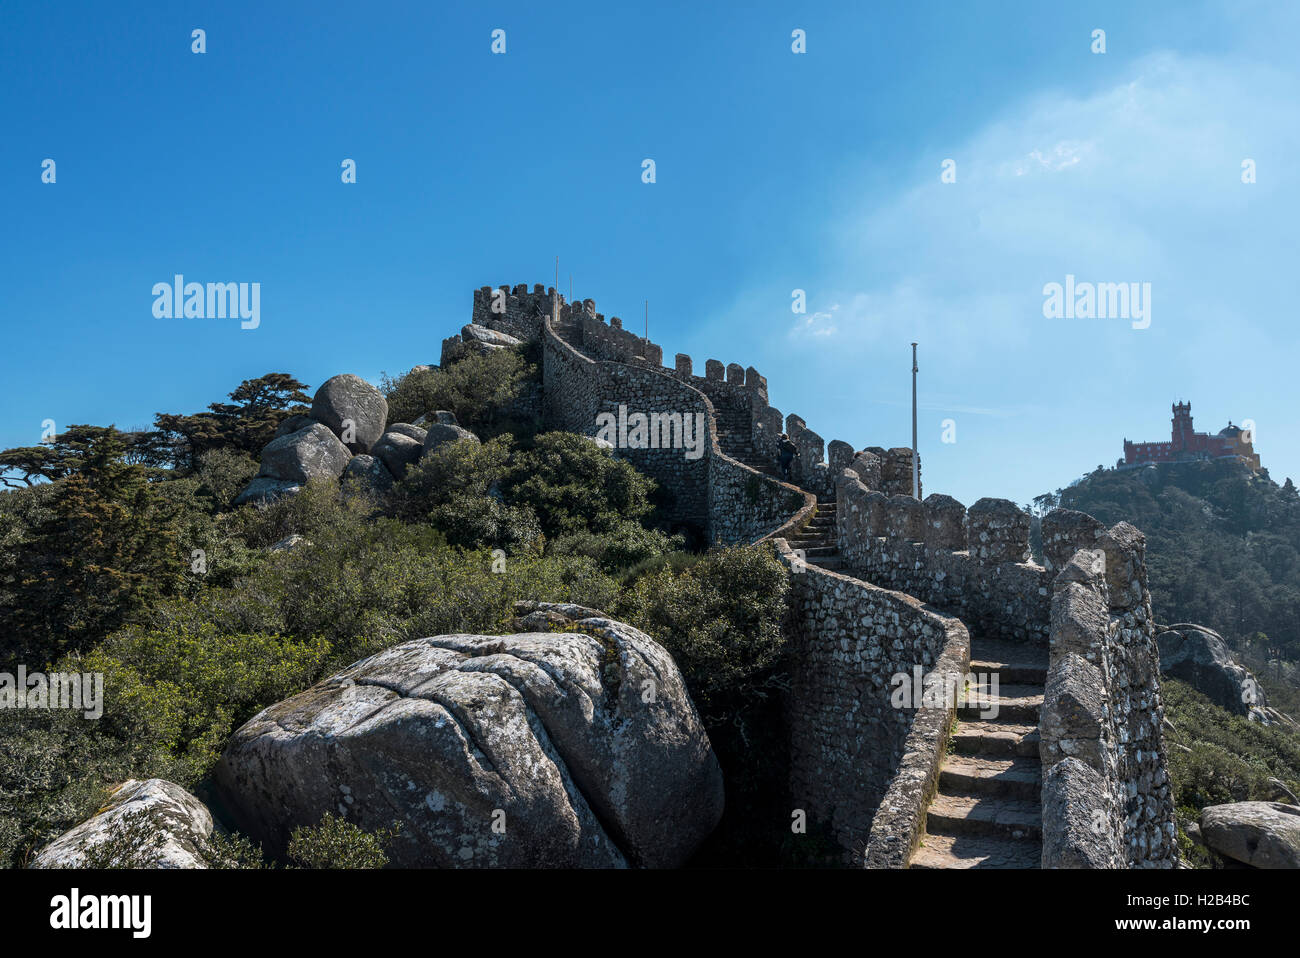 Castelo dos Mouros, Castle of the Moors, Sintra, Portugal Stock Photo